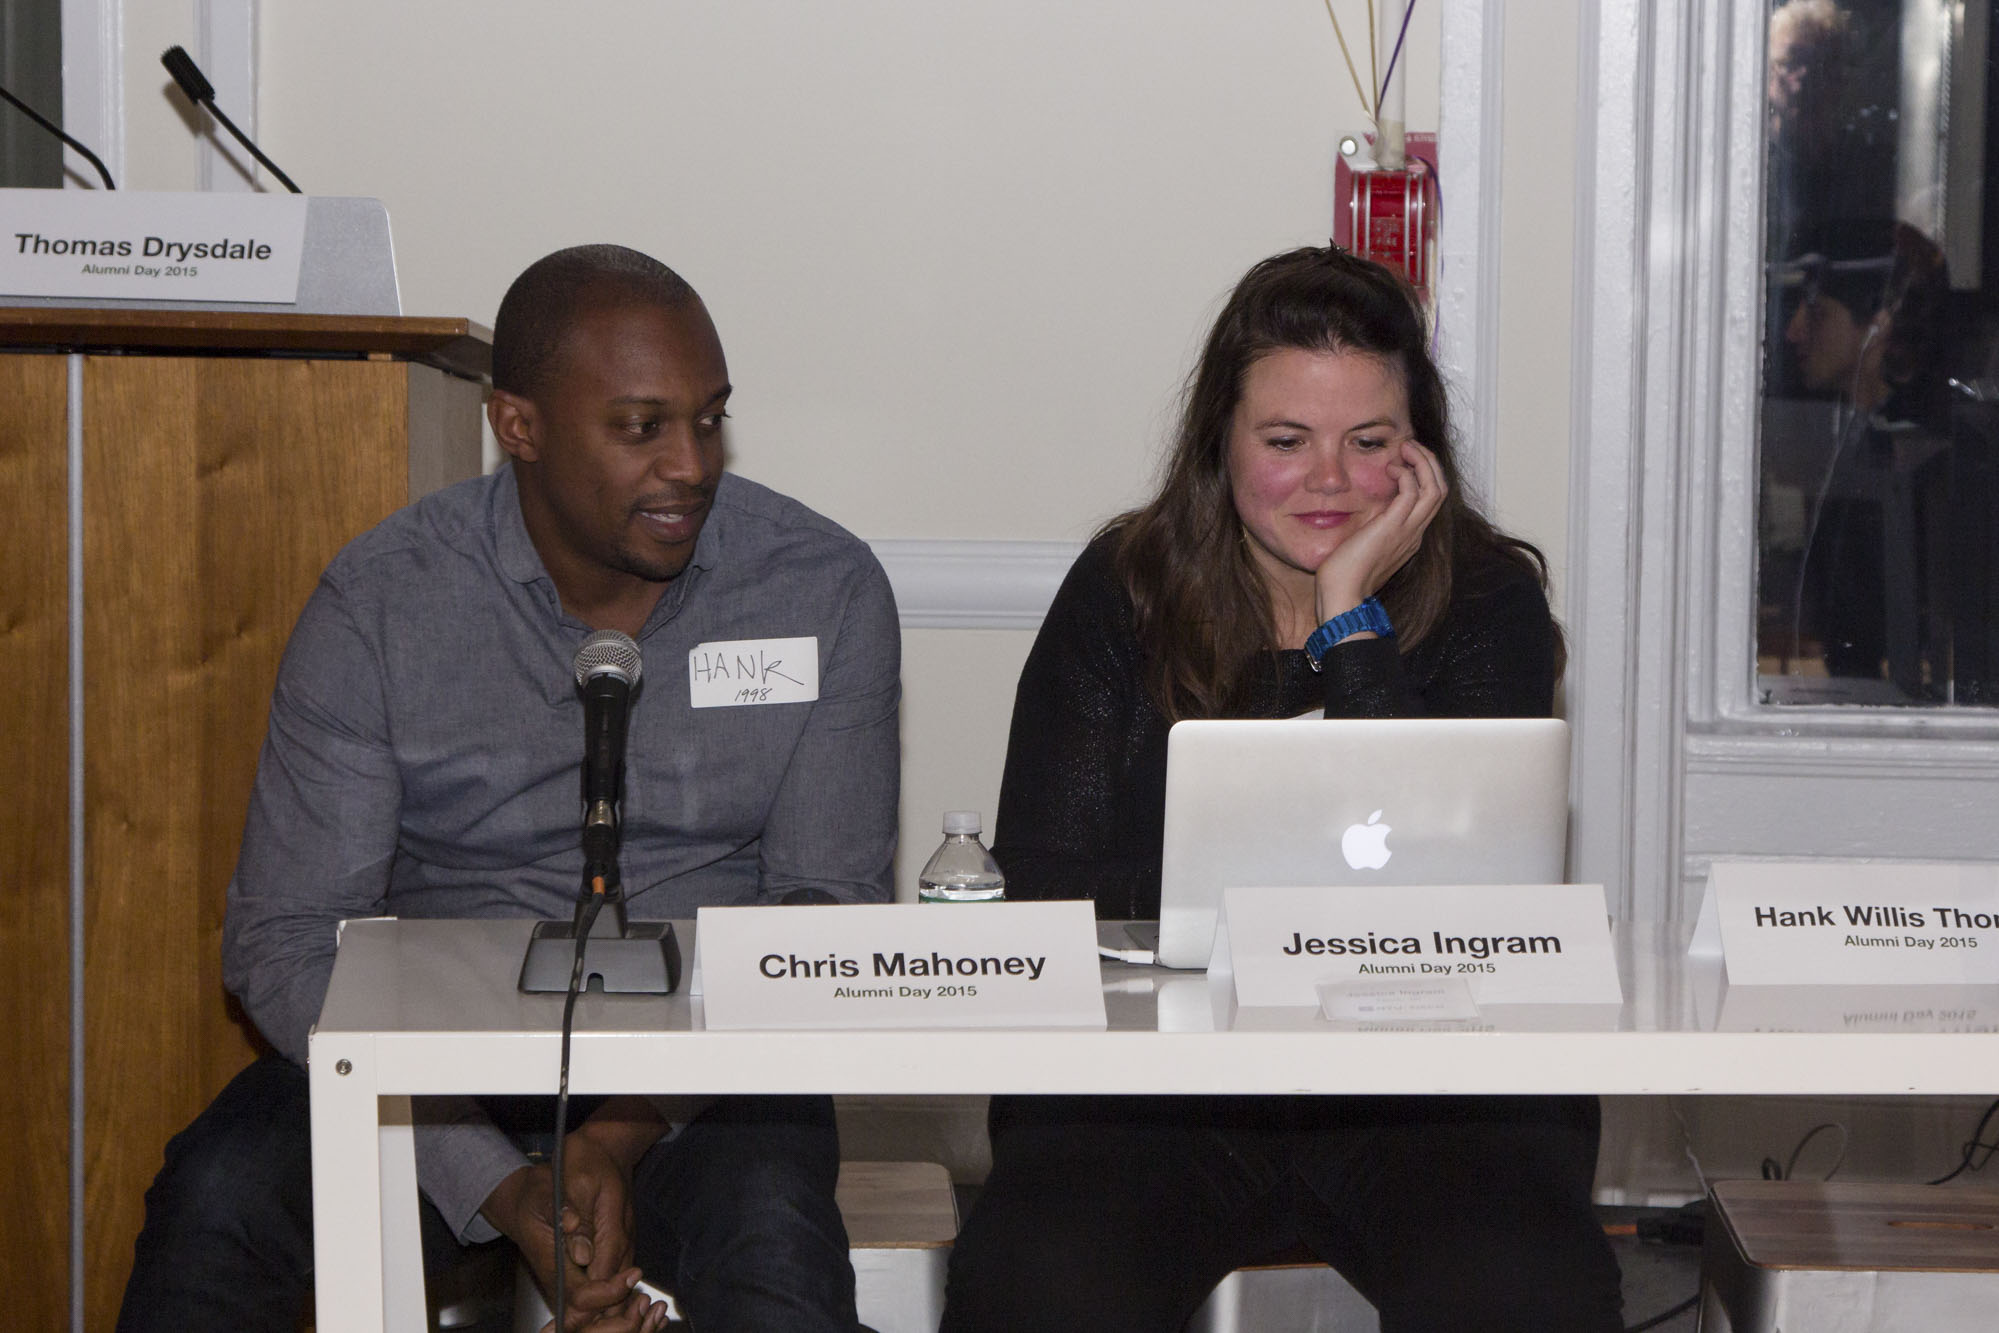 Snapshots from our October 24, 2015 Alumni Day artist panel "State of the Art(s)"